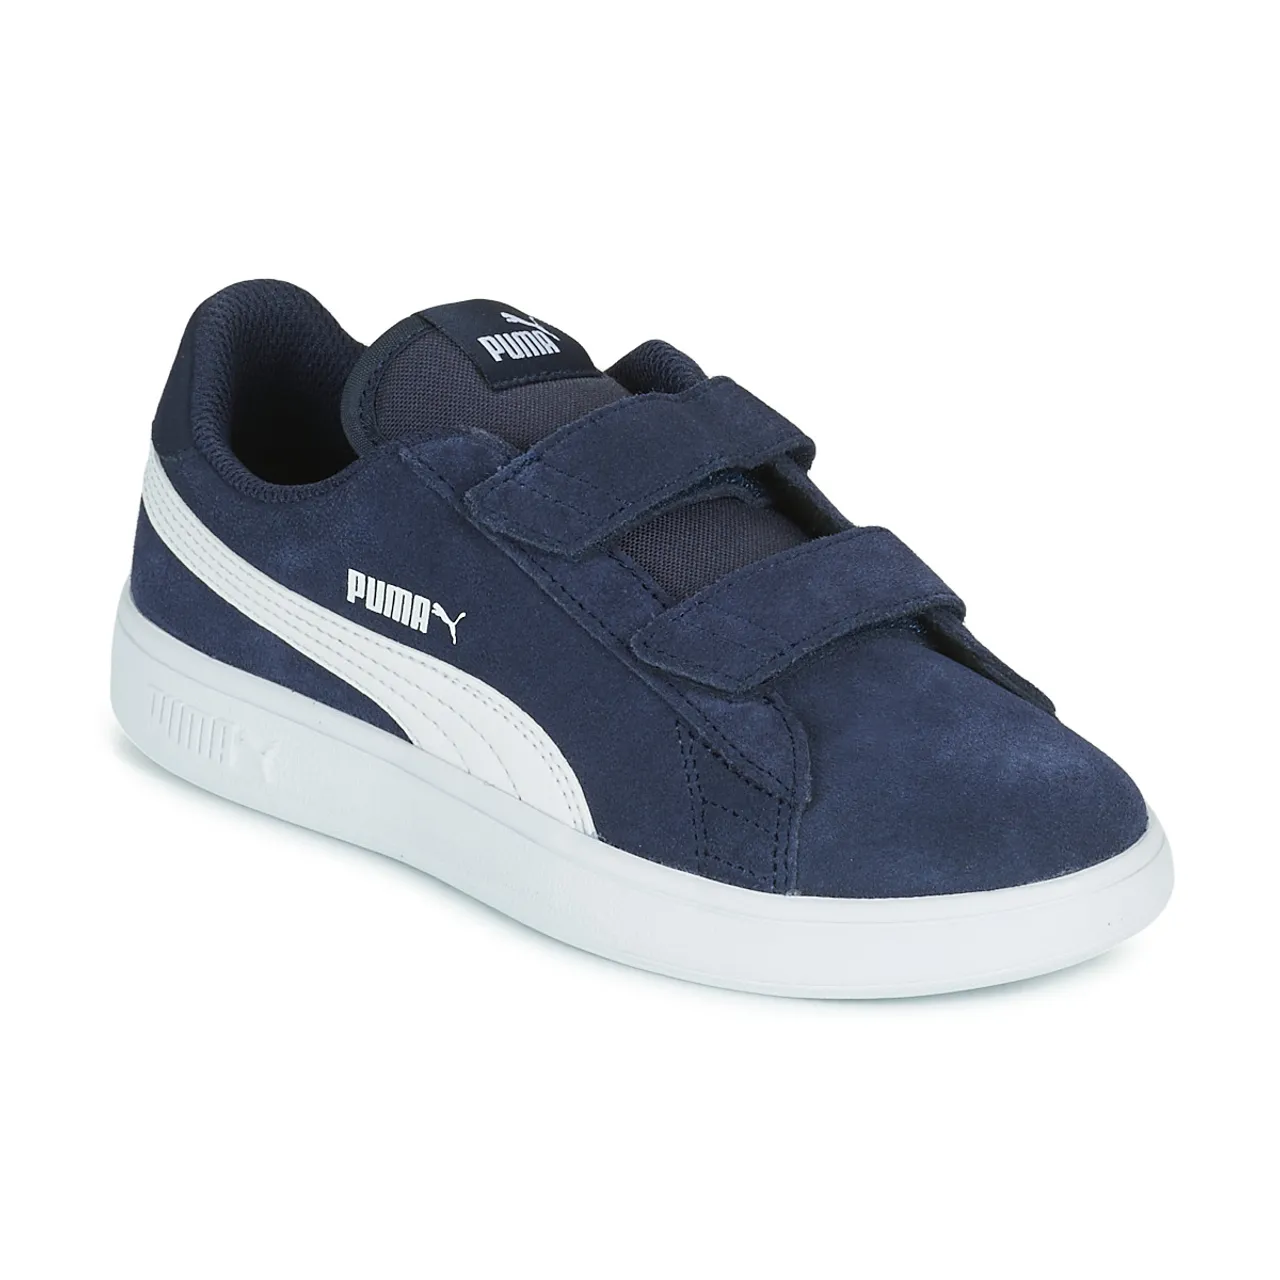 Puma  SMASH PS  boys's Children's Shoes (Trainers) in Blue